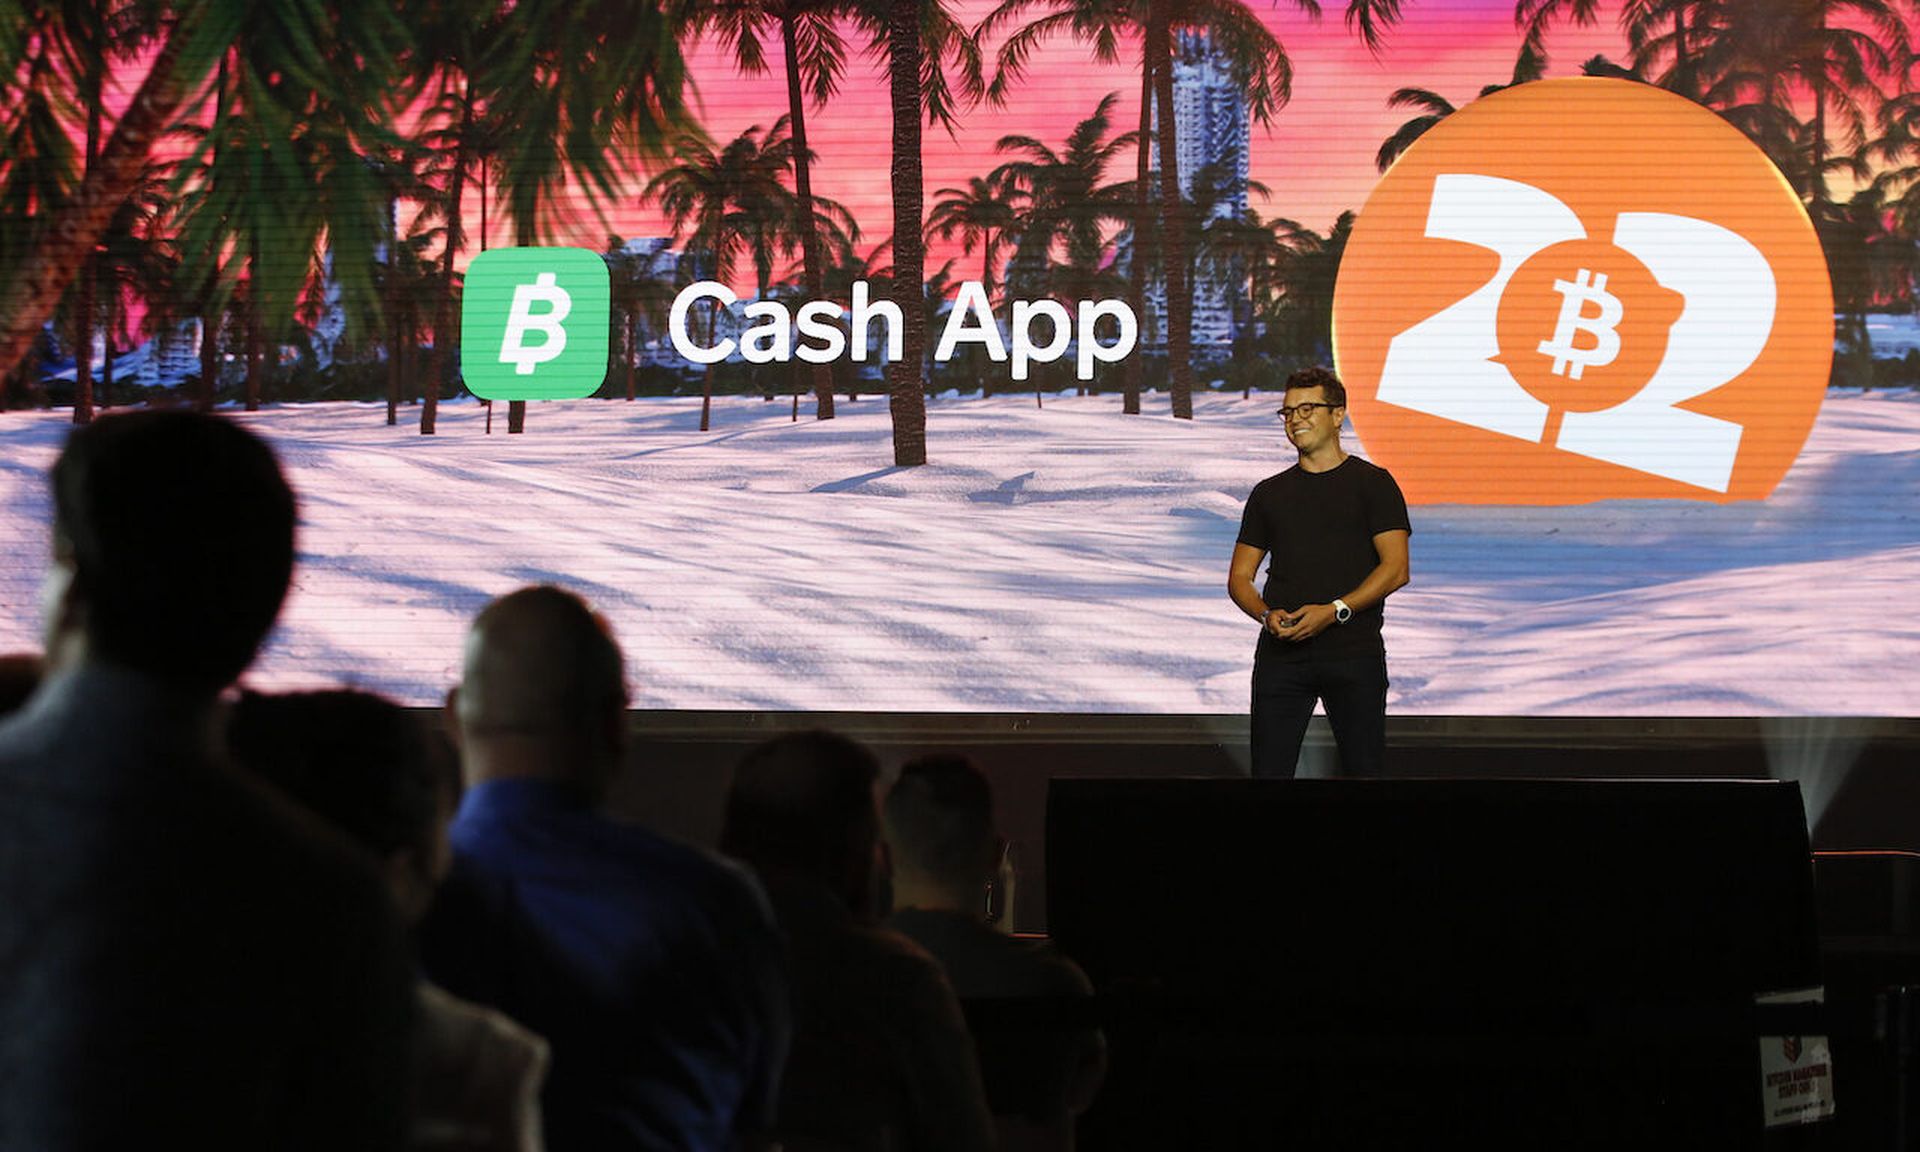 Miles Suter, Bitcoin Product Lead at Cash App, speaks during the Bitcoin 2022 Conference at the Miami Beach Convention Center on April 7, 2022 in Miami, Florida. (Photo by Marco Bello/Getty Images)